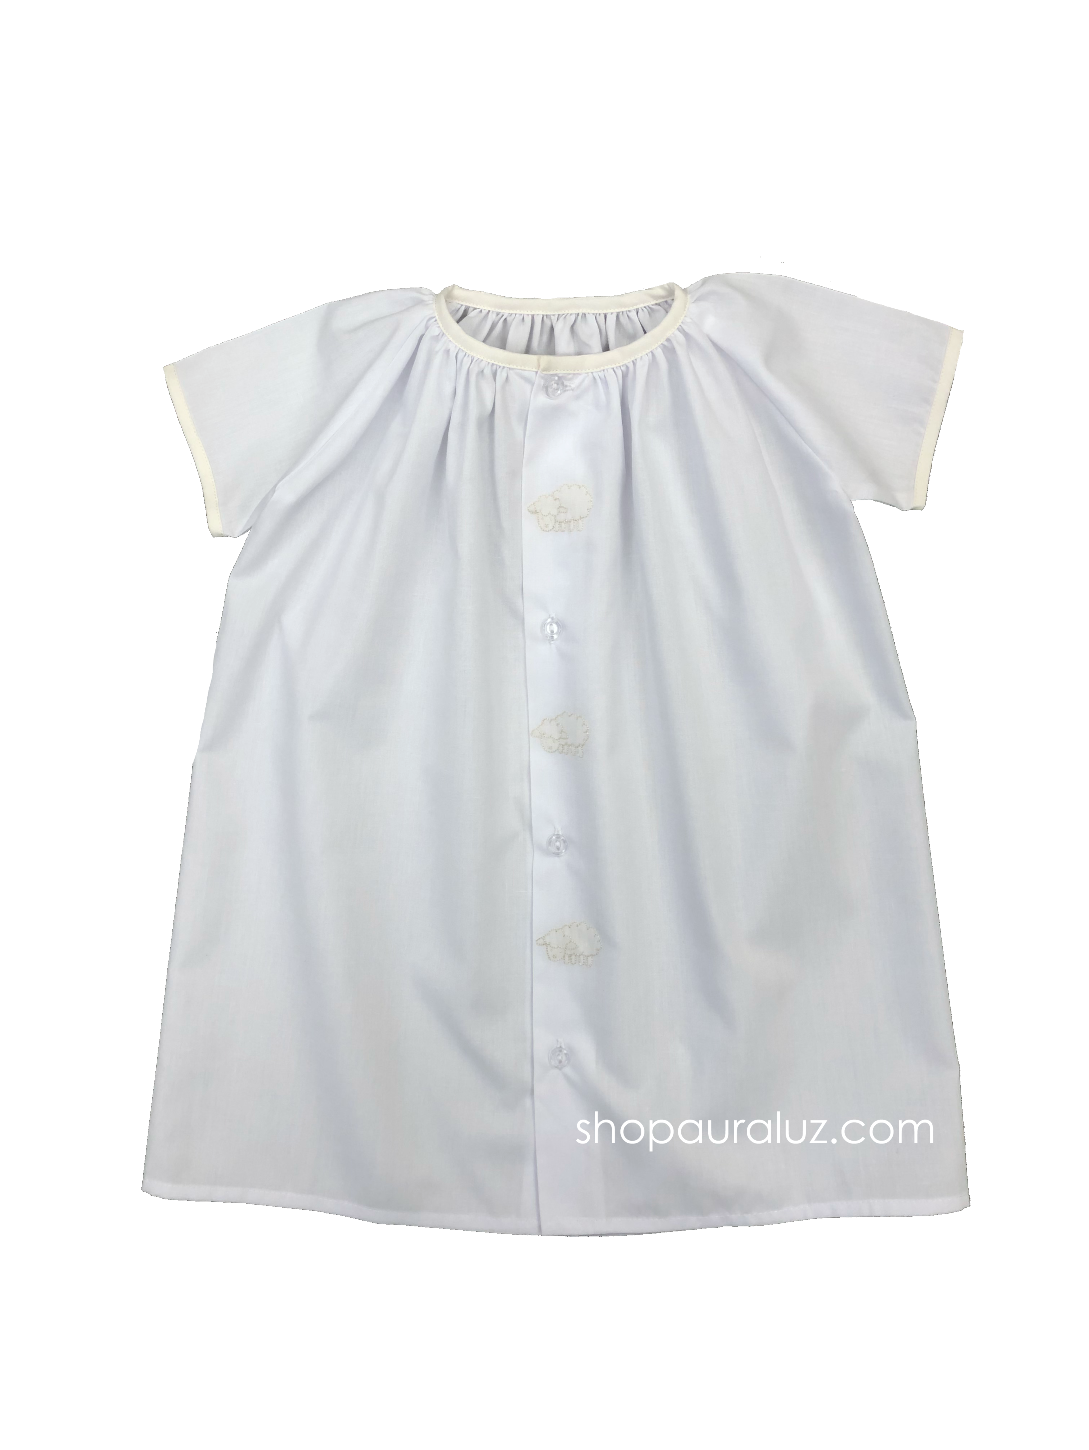 Auraluz Day Gown. White with ecru binding trim and embroidered lambs